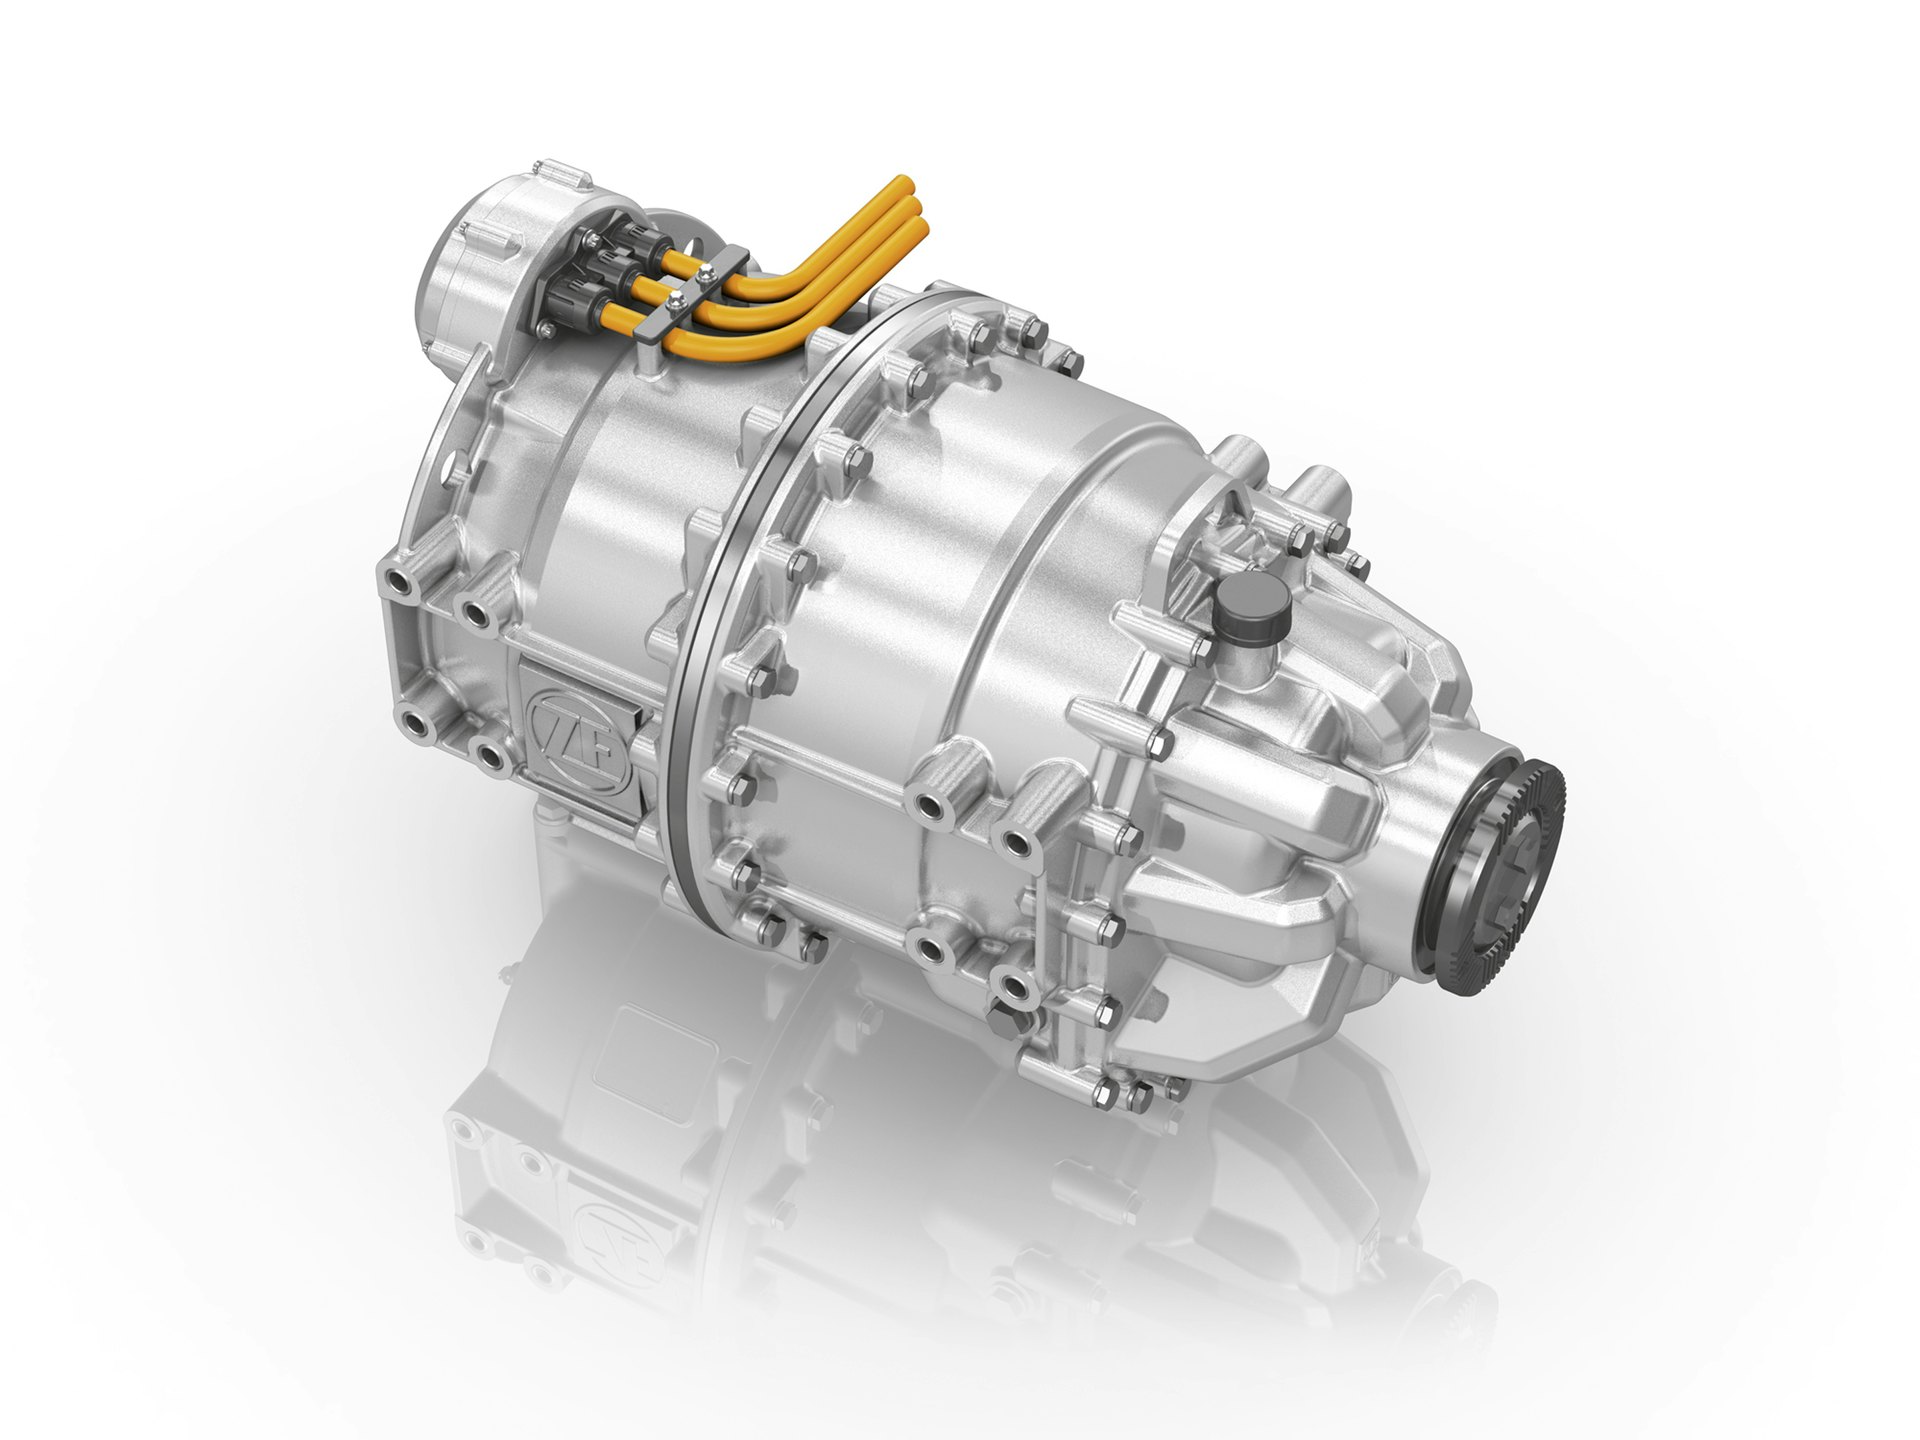 ZF Introduces Electric Drive Concepts for Inner City Transport Applications